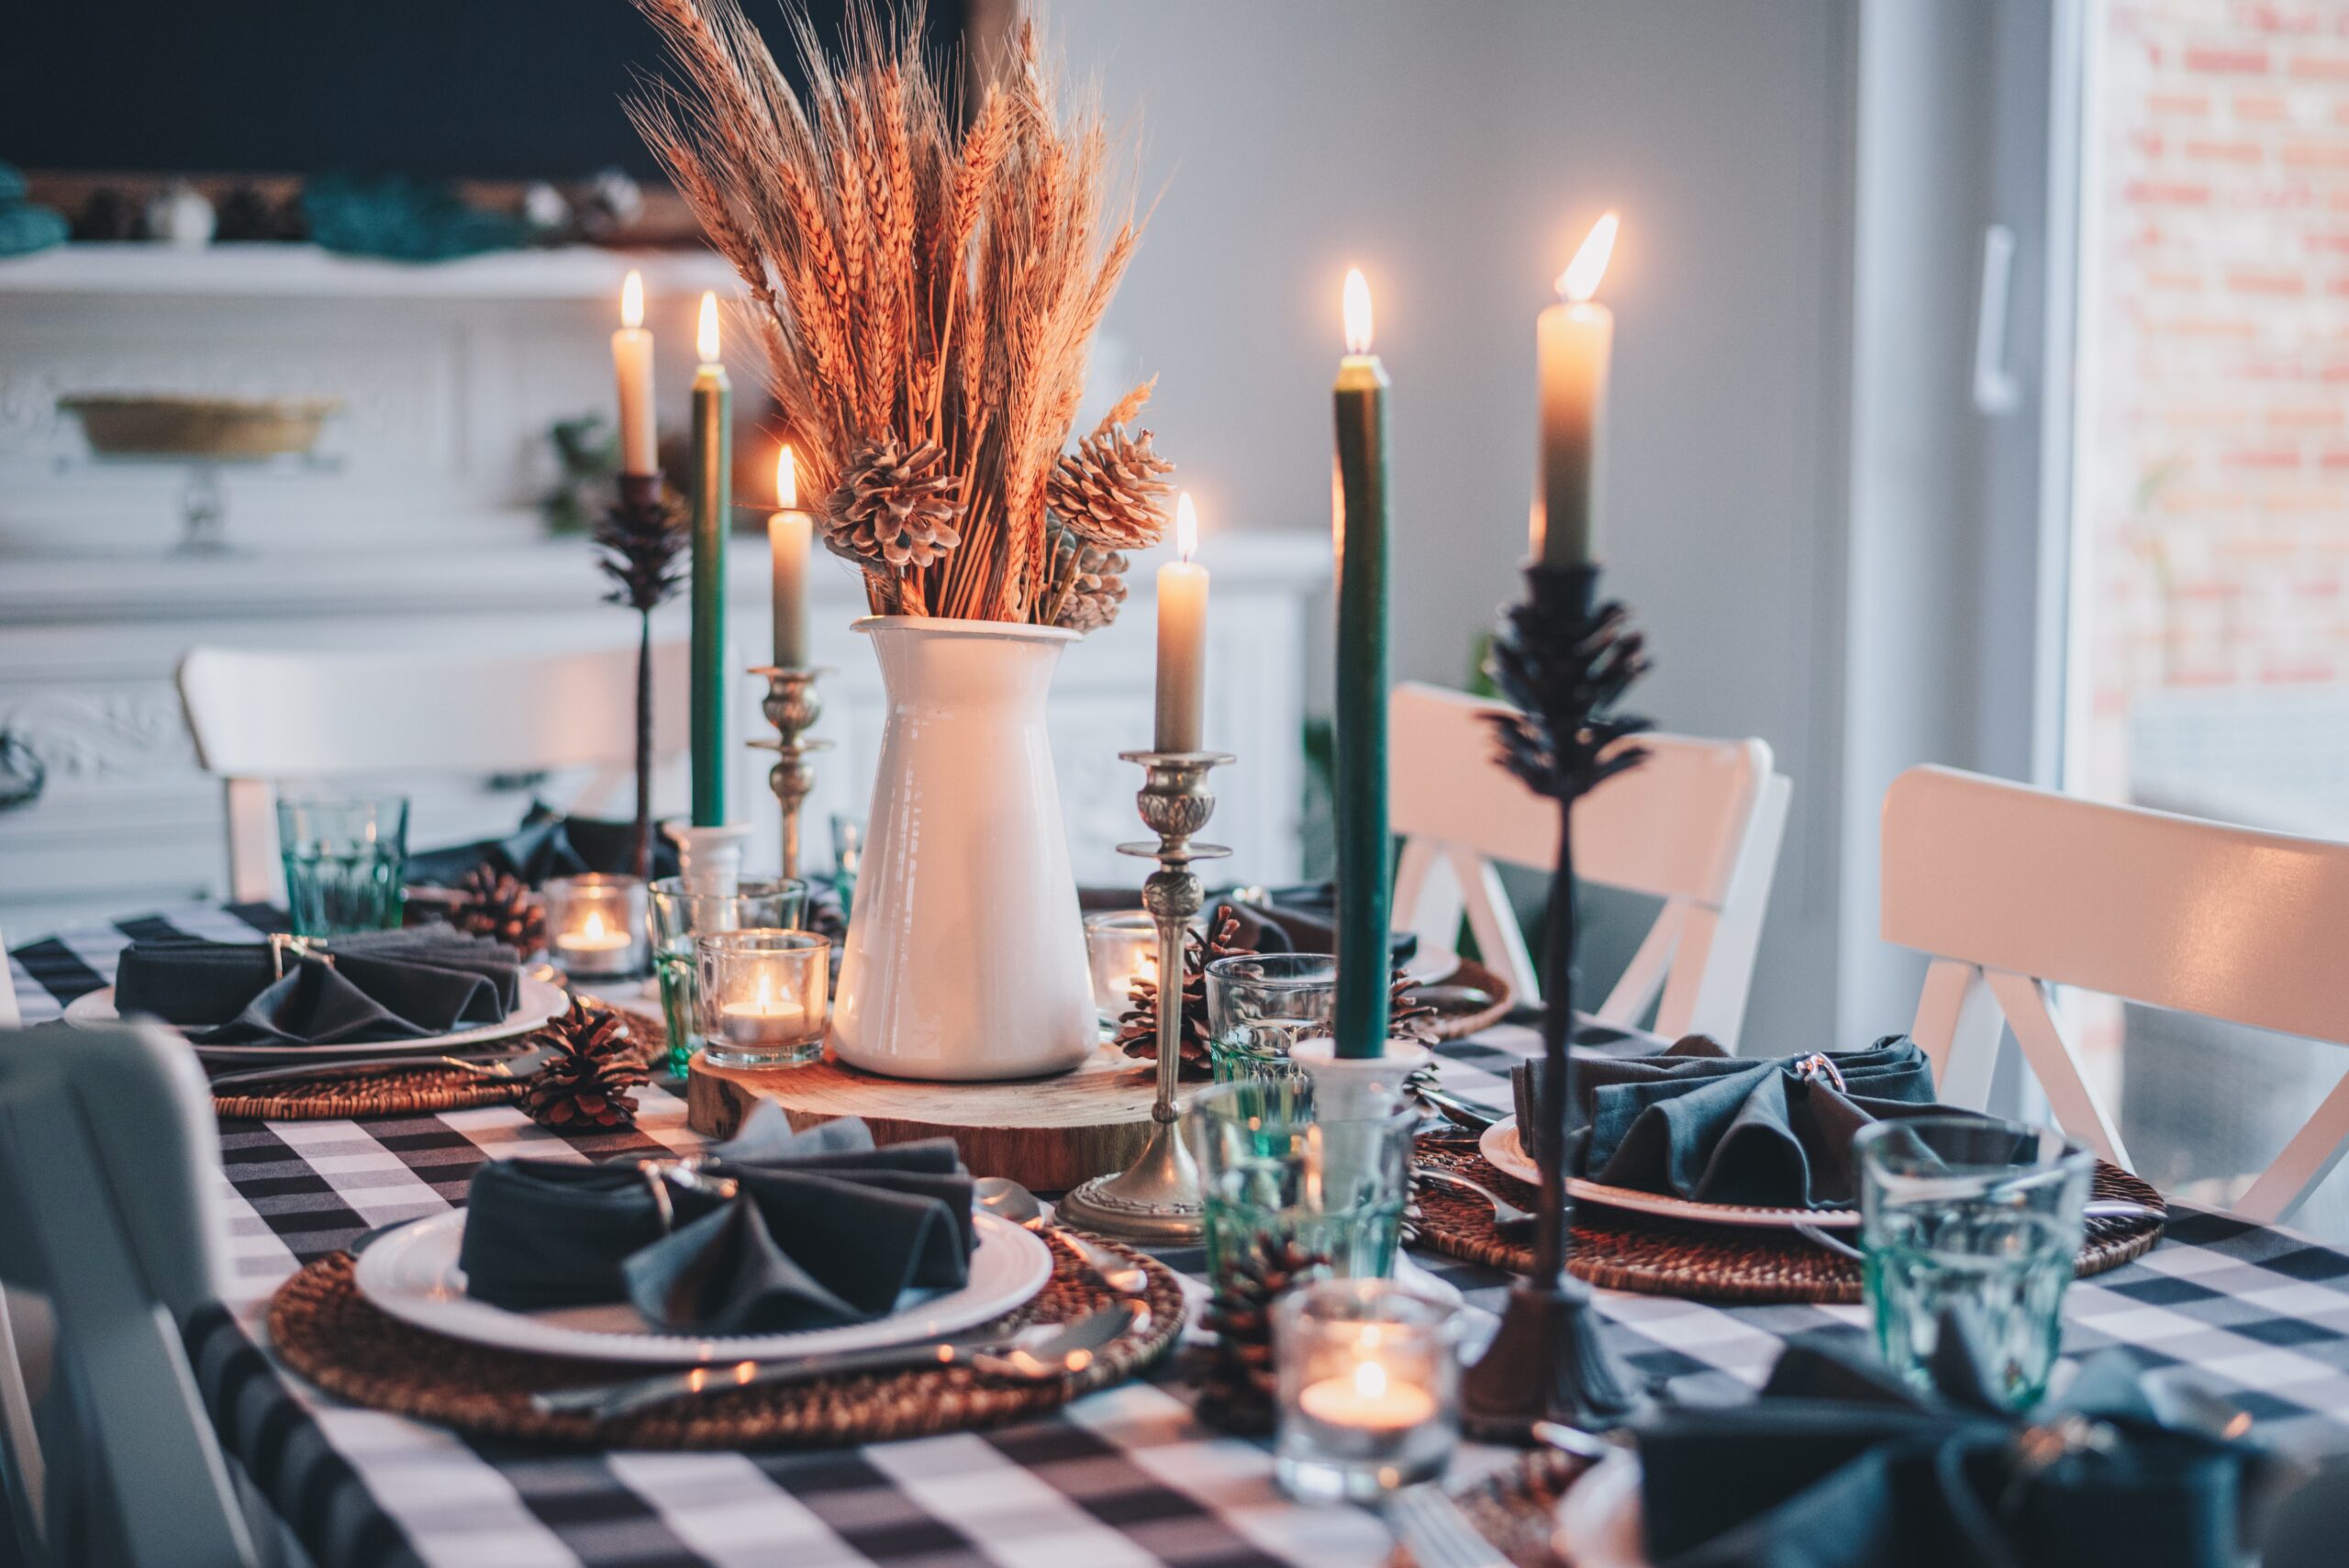 If you're short on time, go with a simple tablescape for the holidays. Pictured: A simple holiday tablescape.